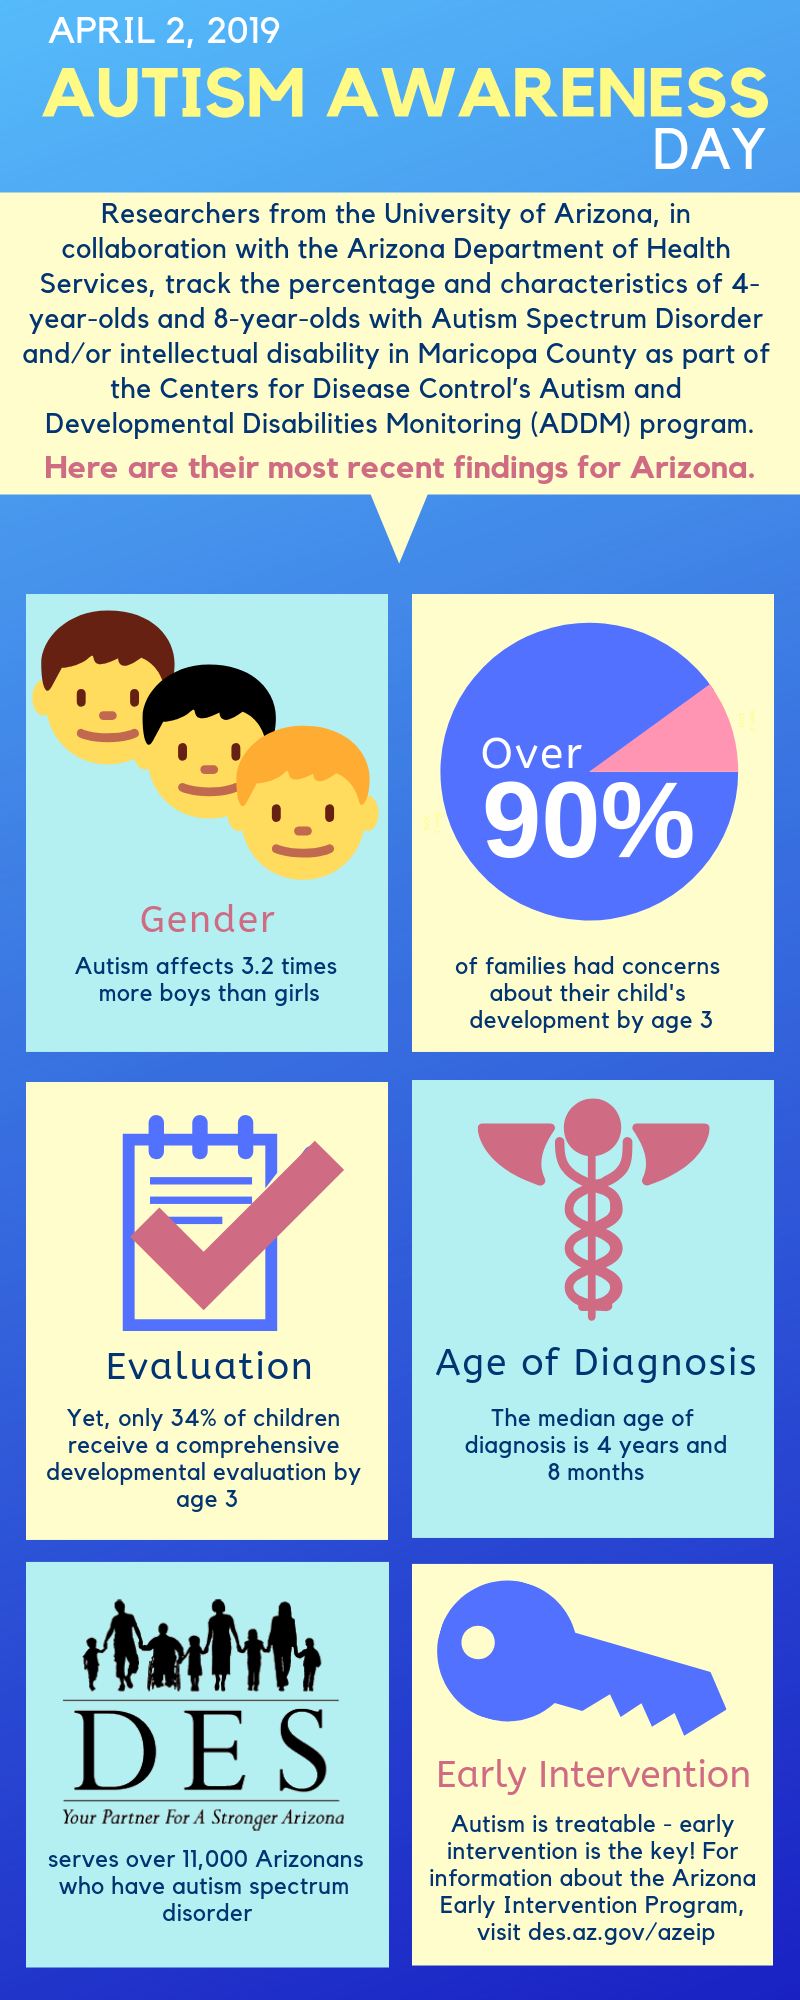 Facts and figures about Autism Awareness